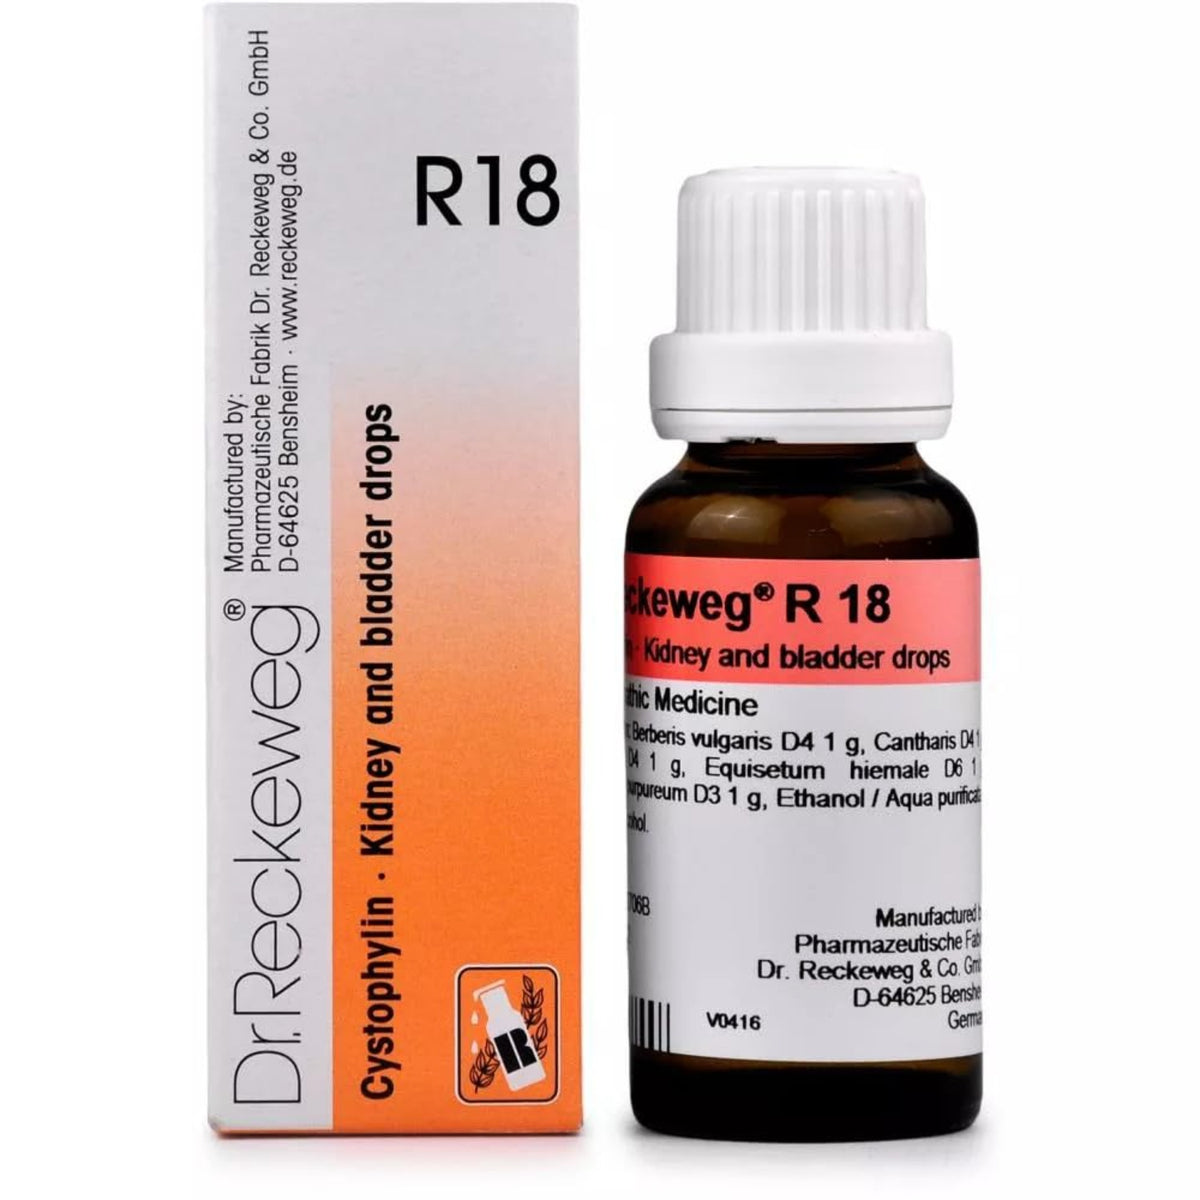 Dr Reckeweg Homoeopathy R18 Kidney And Bladder Drops 22 ml